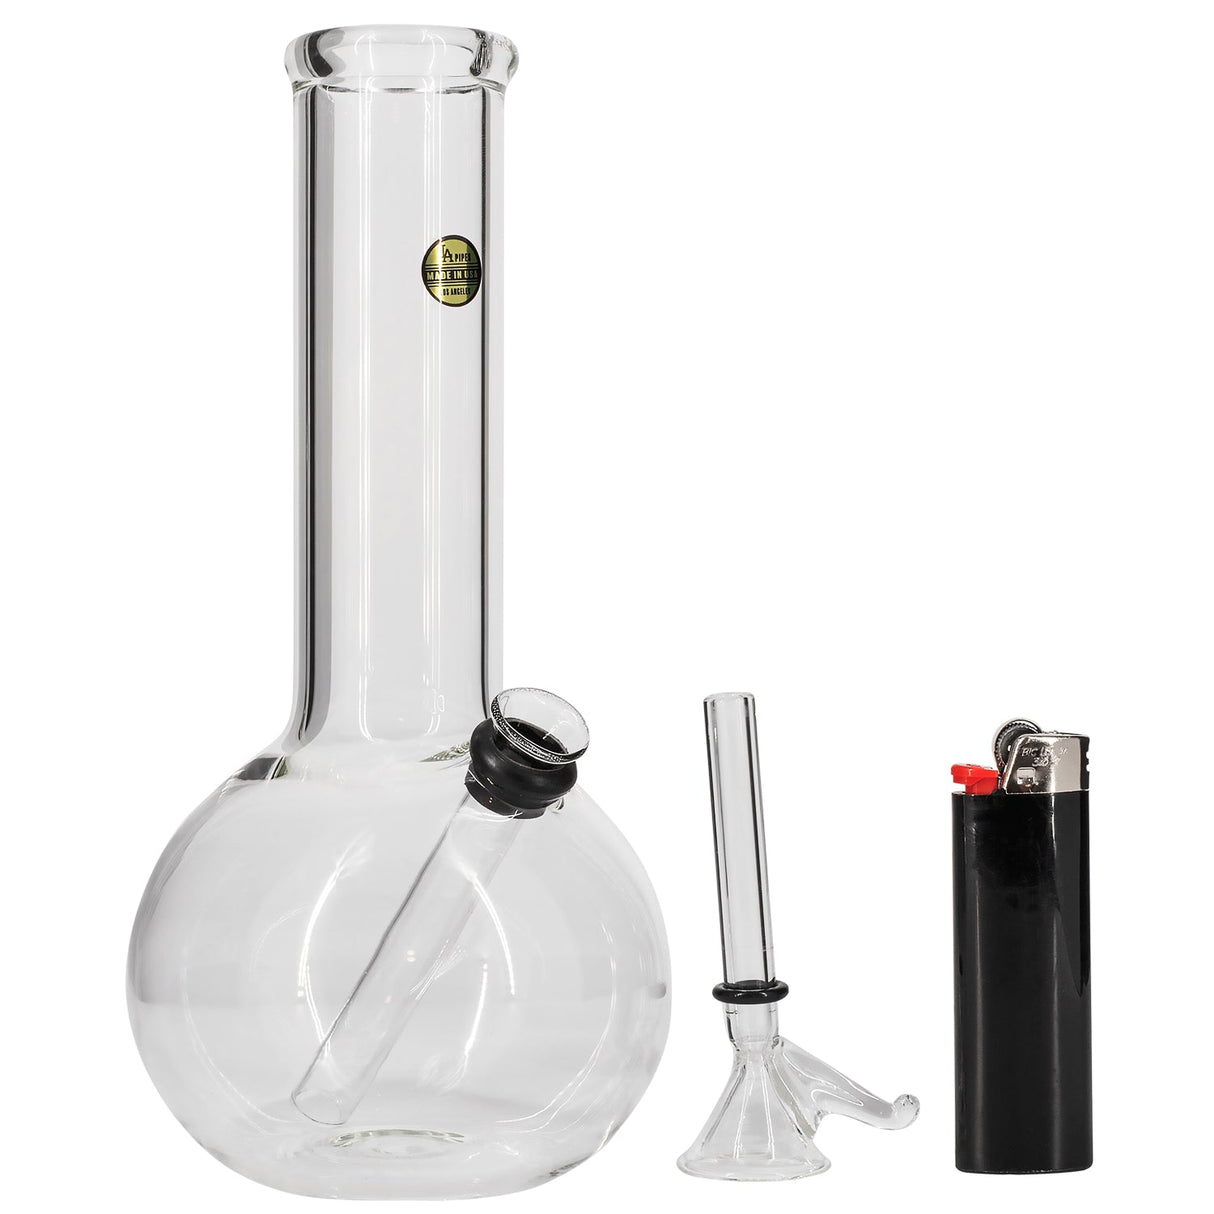 LA Pipes Clear Glass Basic Water Pipe with Bubble Design, 8" Height, 45 Degree Joint - Front View with Lighter